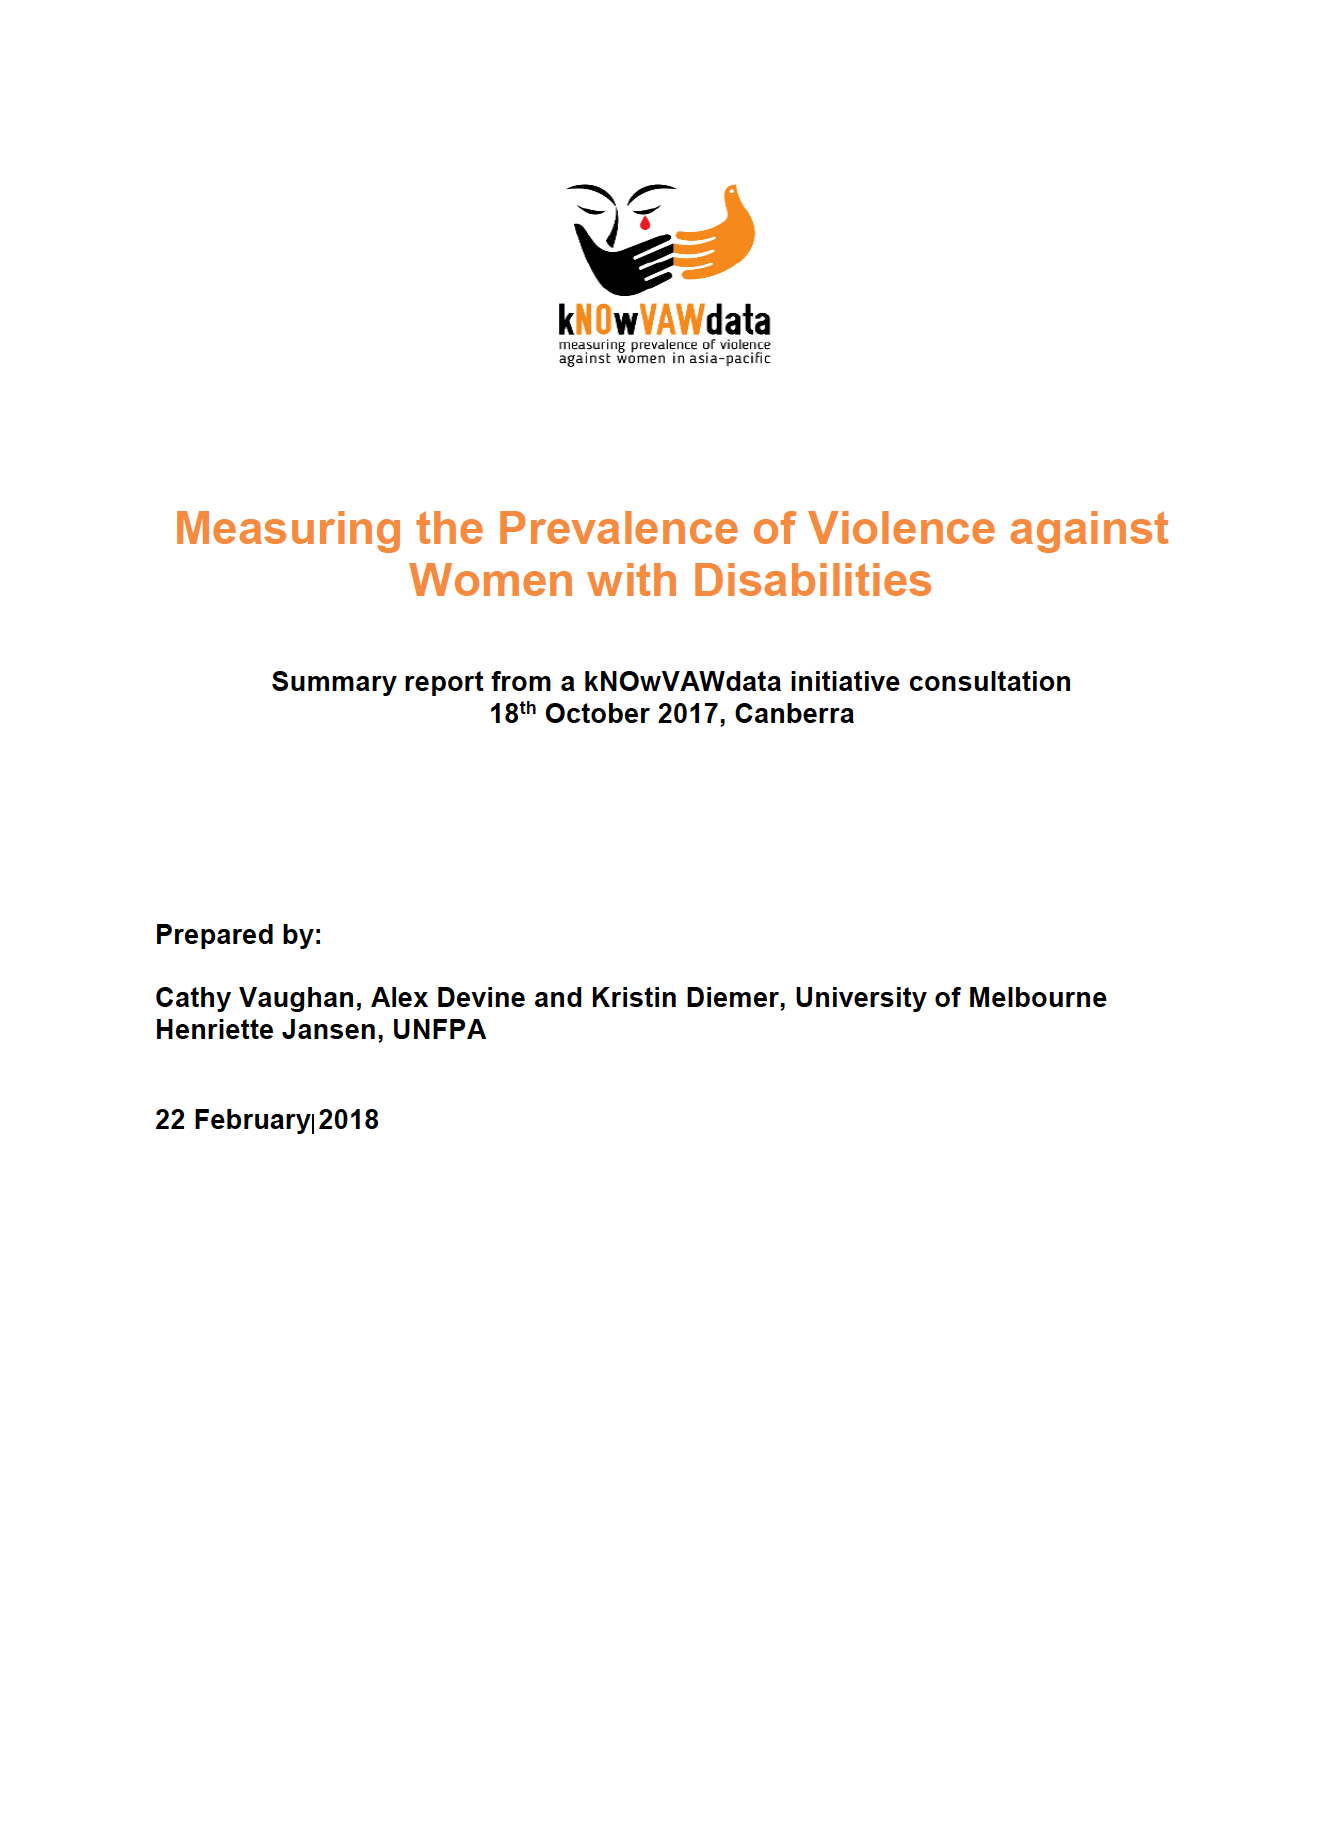 Cover of kNOwVAWdata report on Measuring the Prevalence of Violence against Women with Disabilities